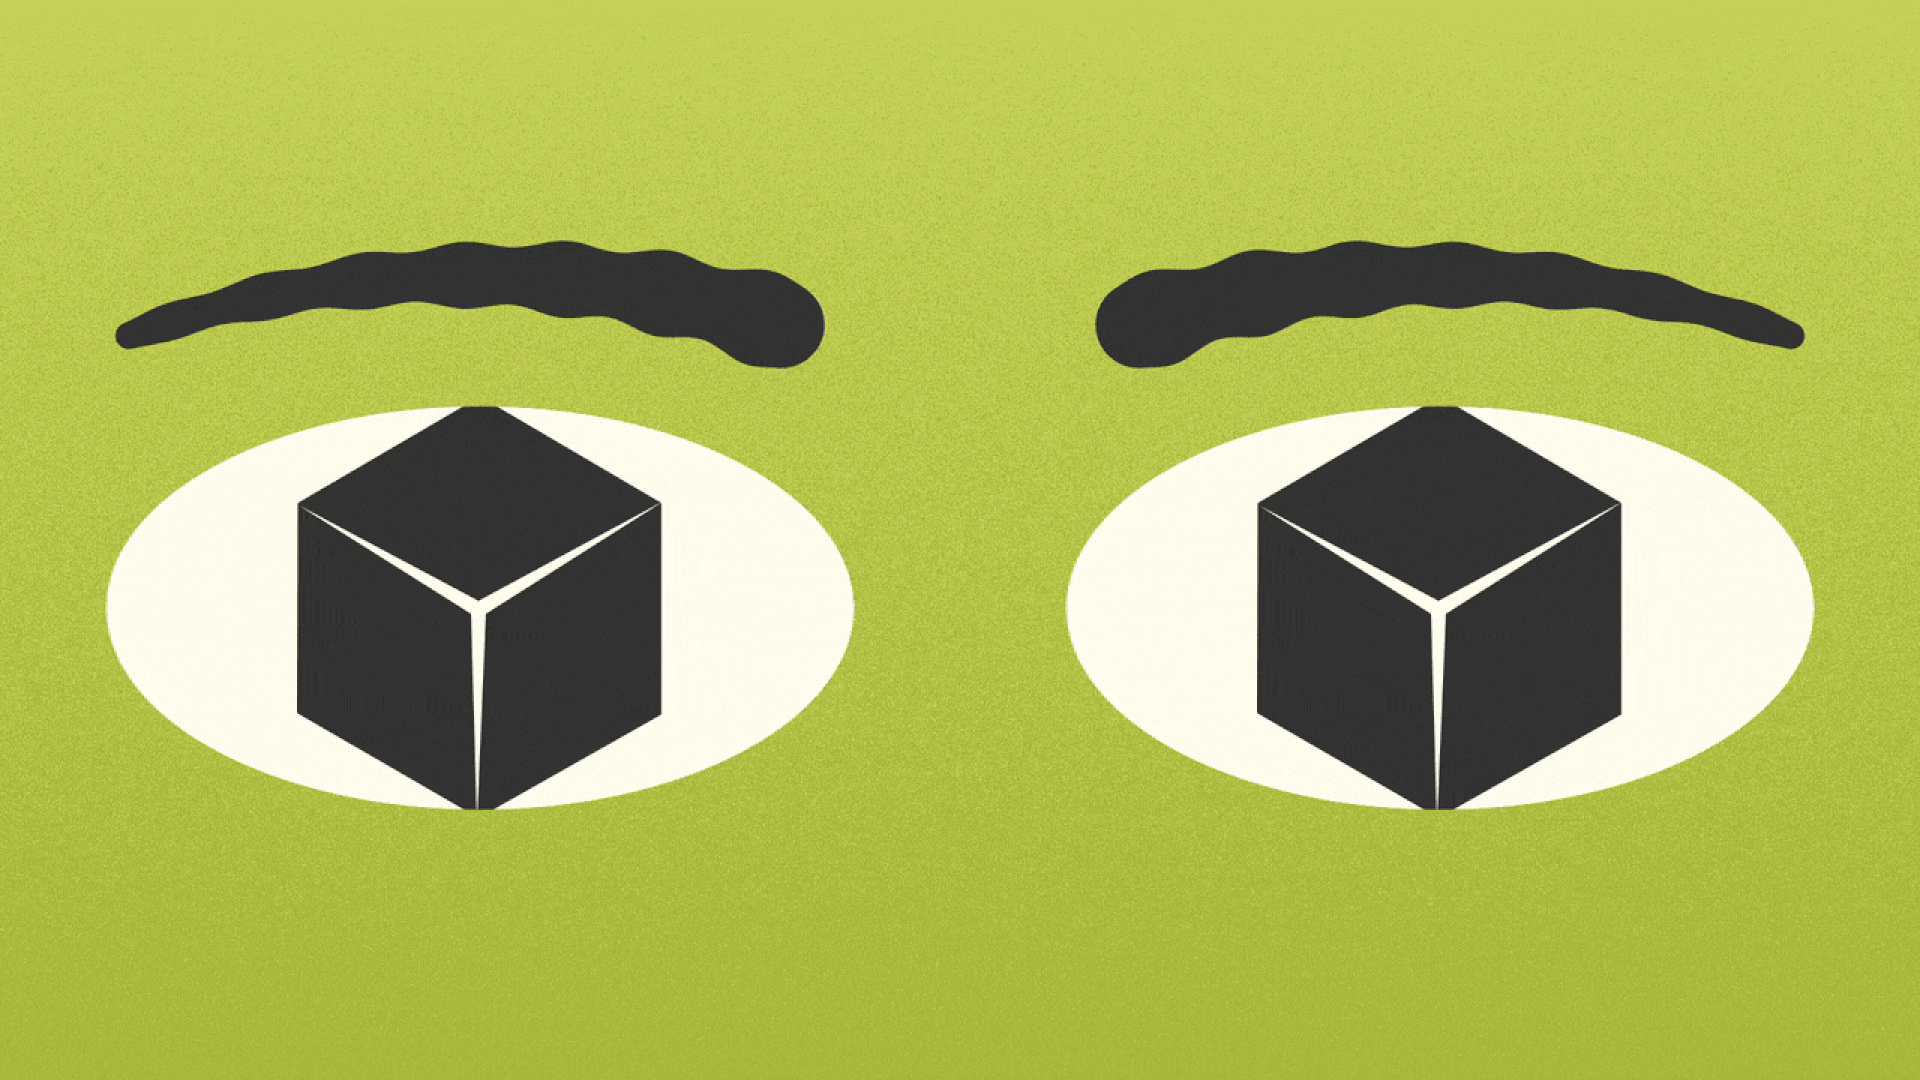 Illustration of a pair of eyes with cubes for pupils, looking around.